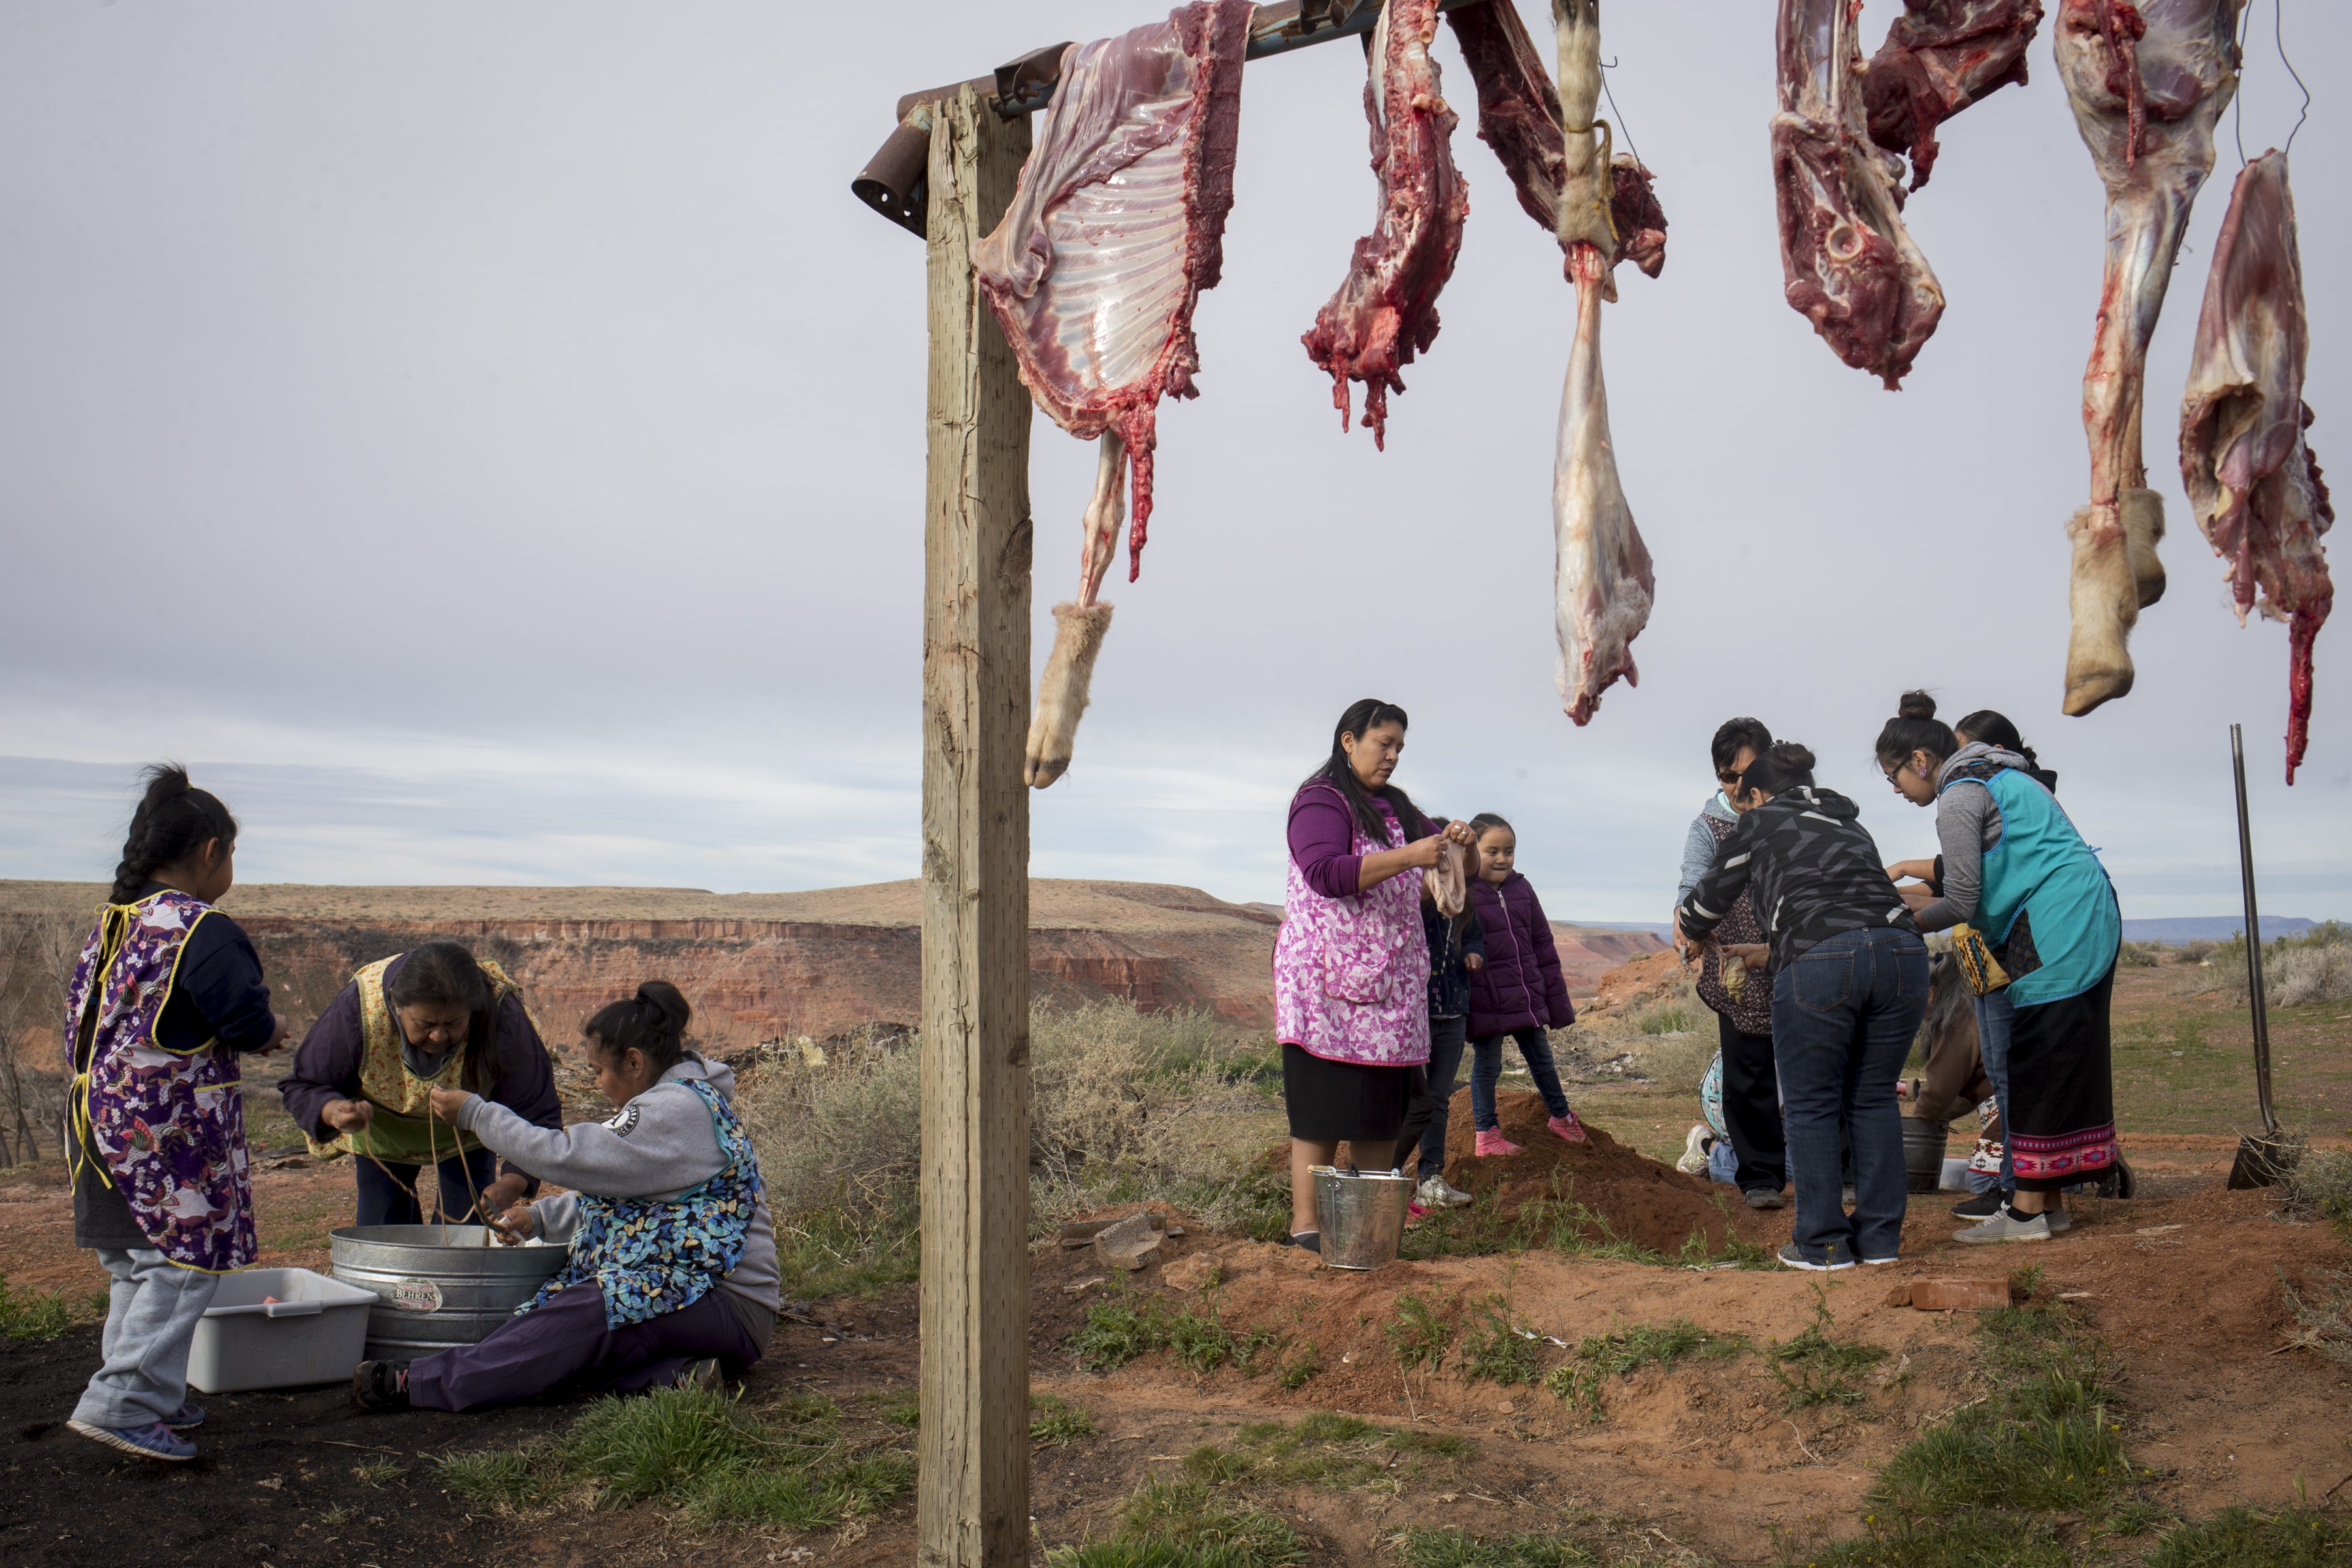 As each sheep was butchered, a group of women cleaned the intestines so they could be cooked and served the next day.